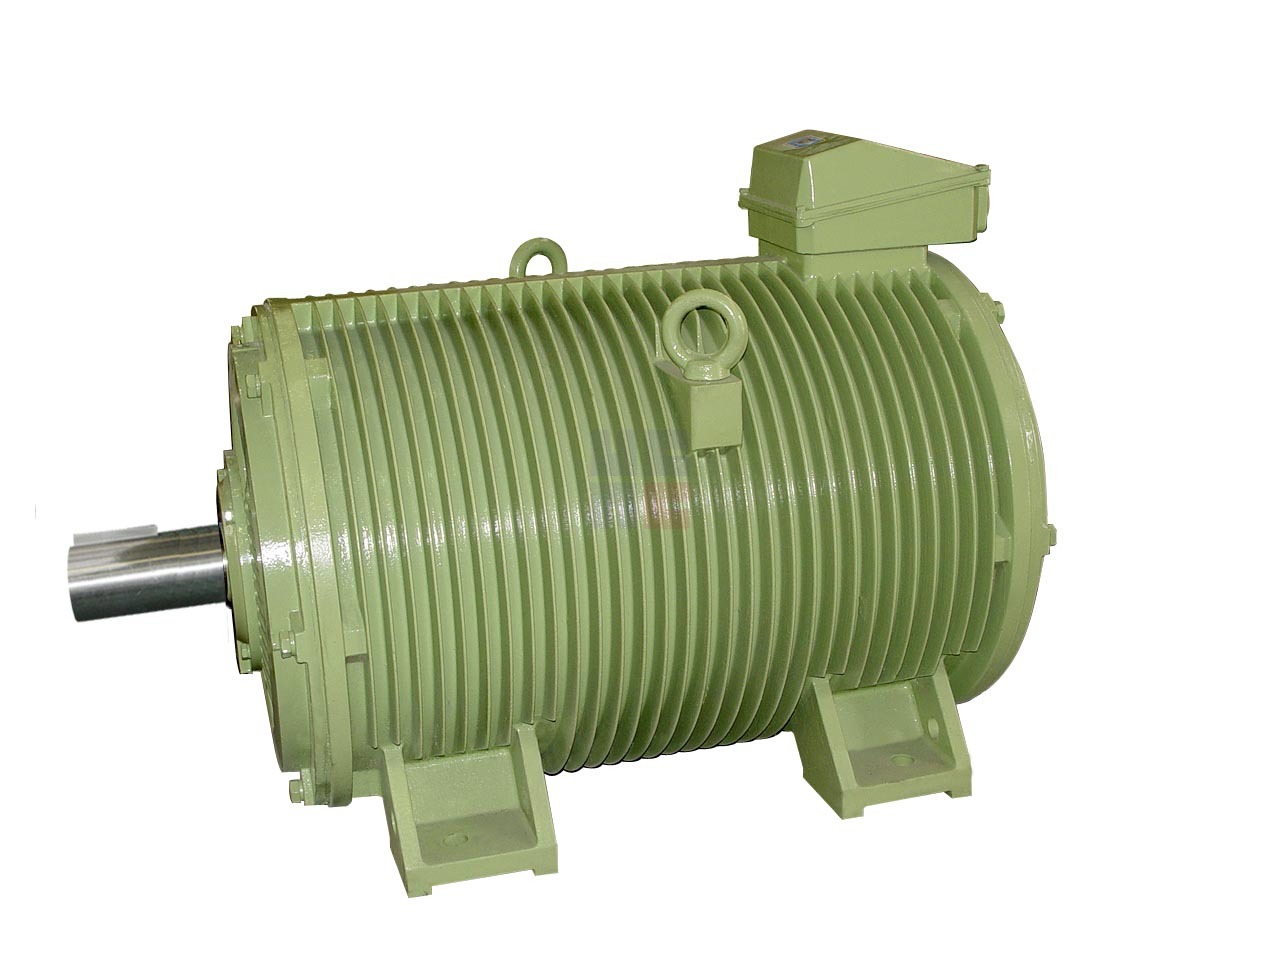 YGP Series of Variable Frequency Speed Regulating Three-phase Asynchronous Motor for Roller Table (Frame Size: 112-450)